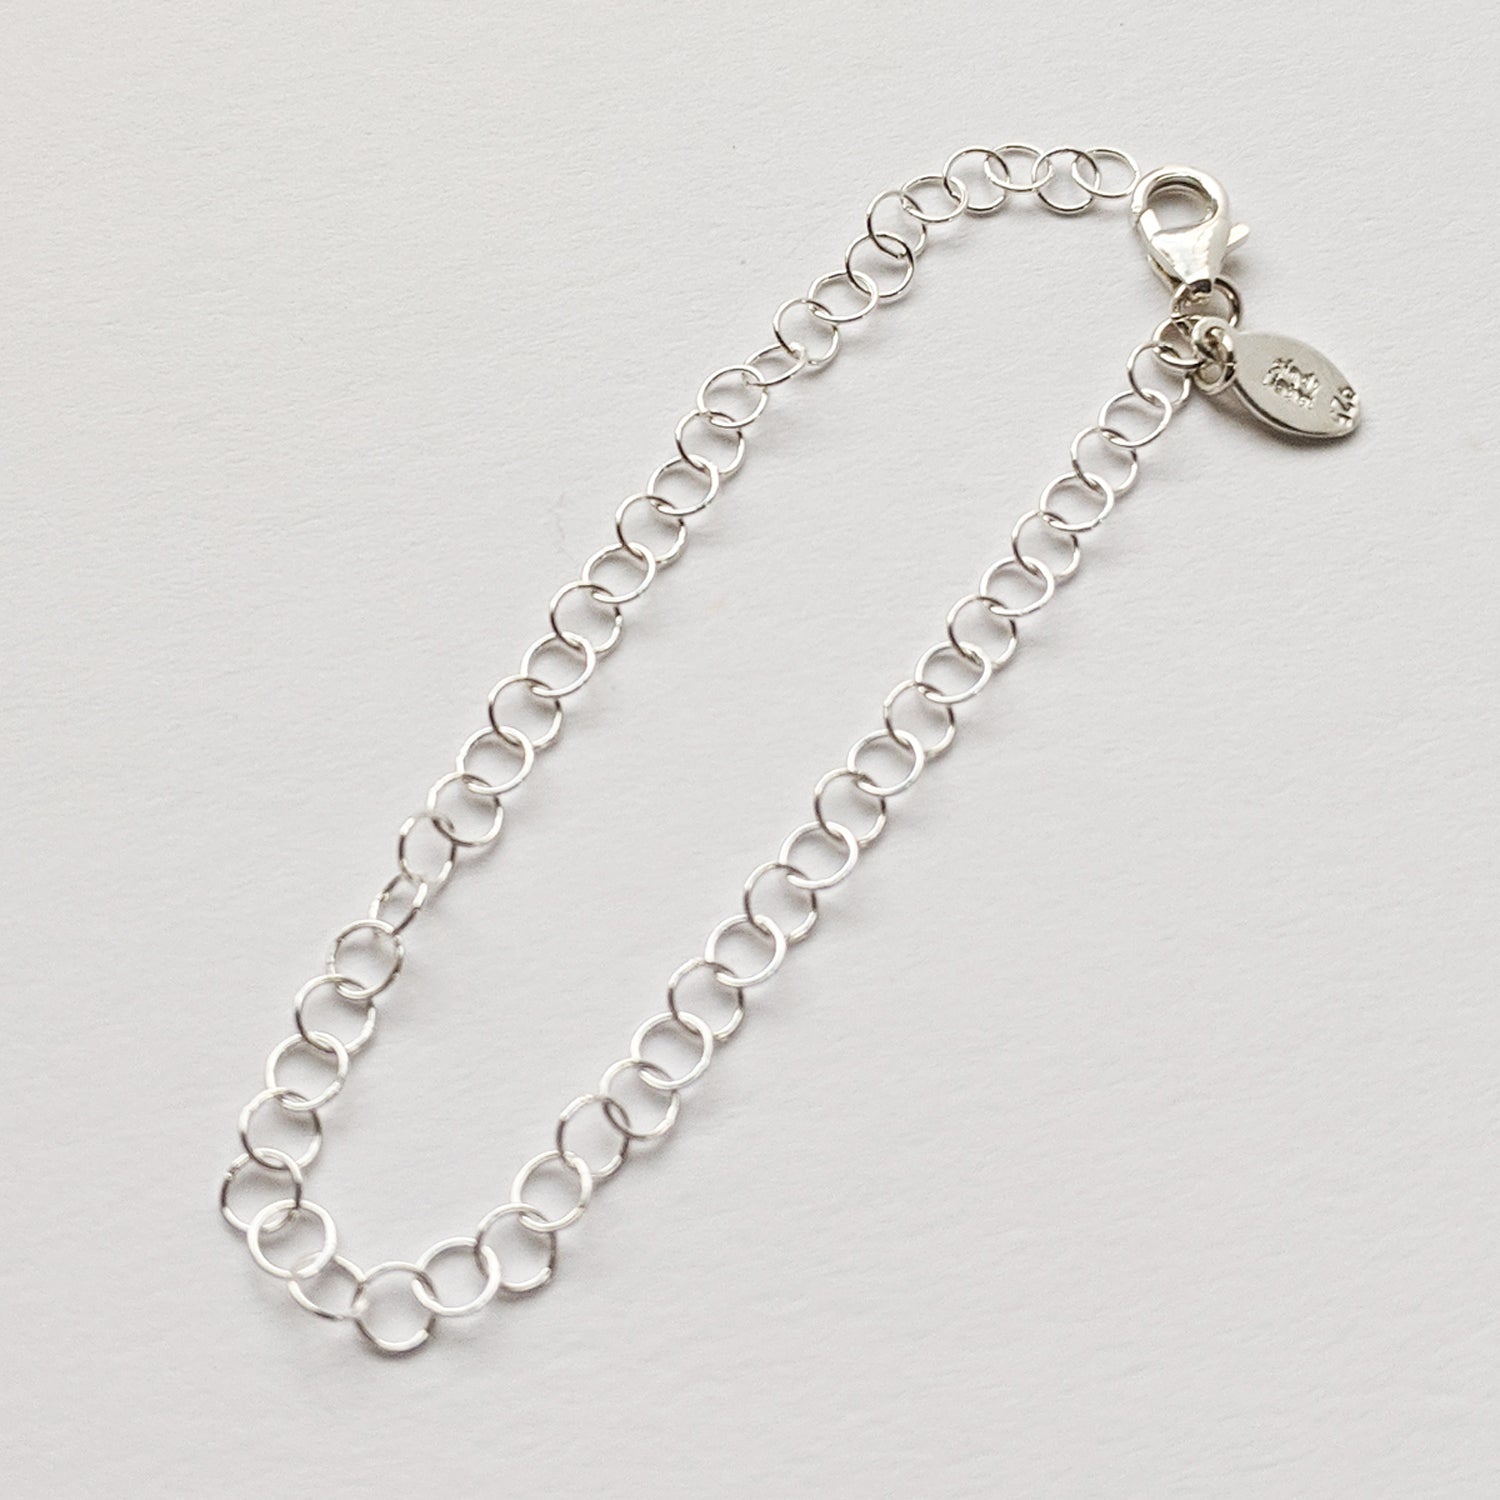 4 Chain Extender in Silver